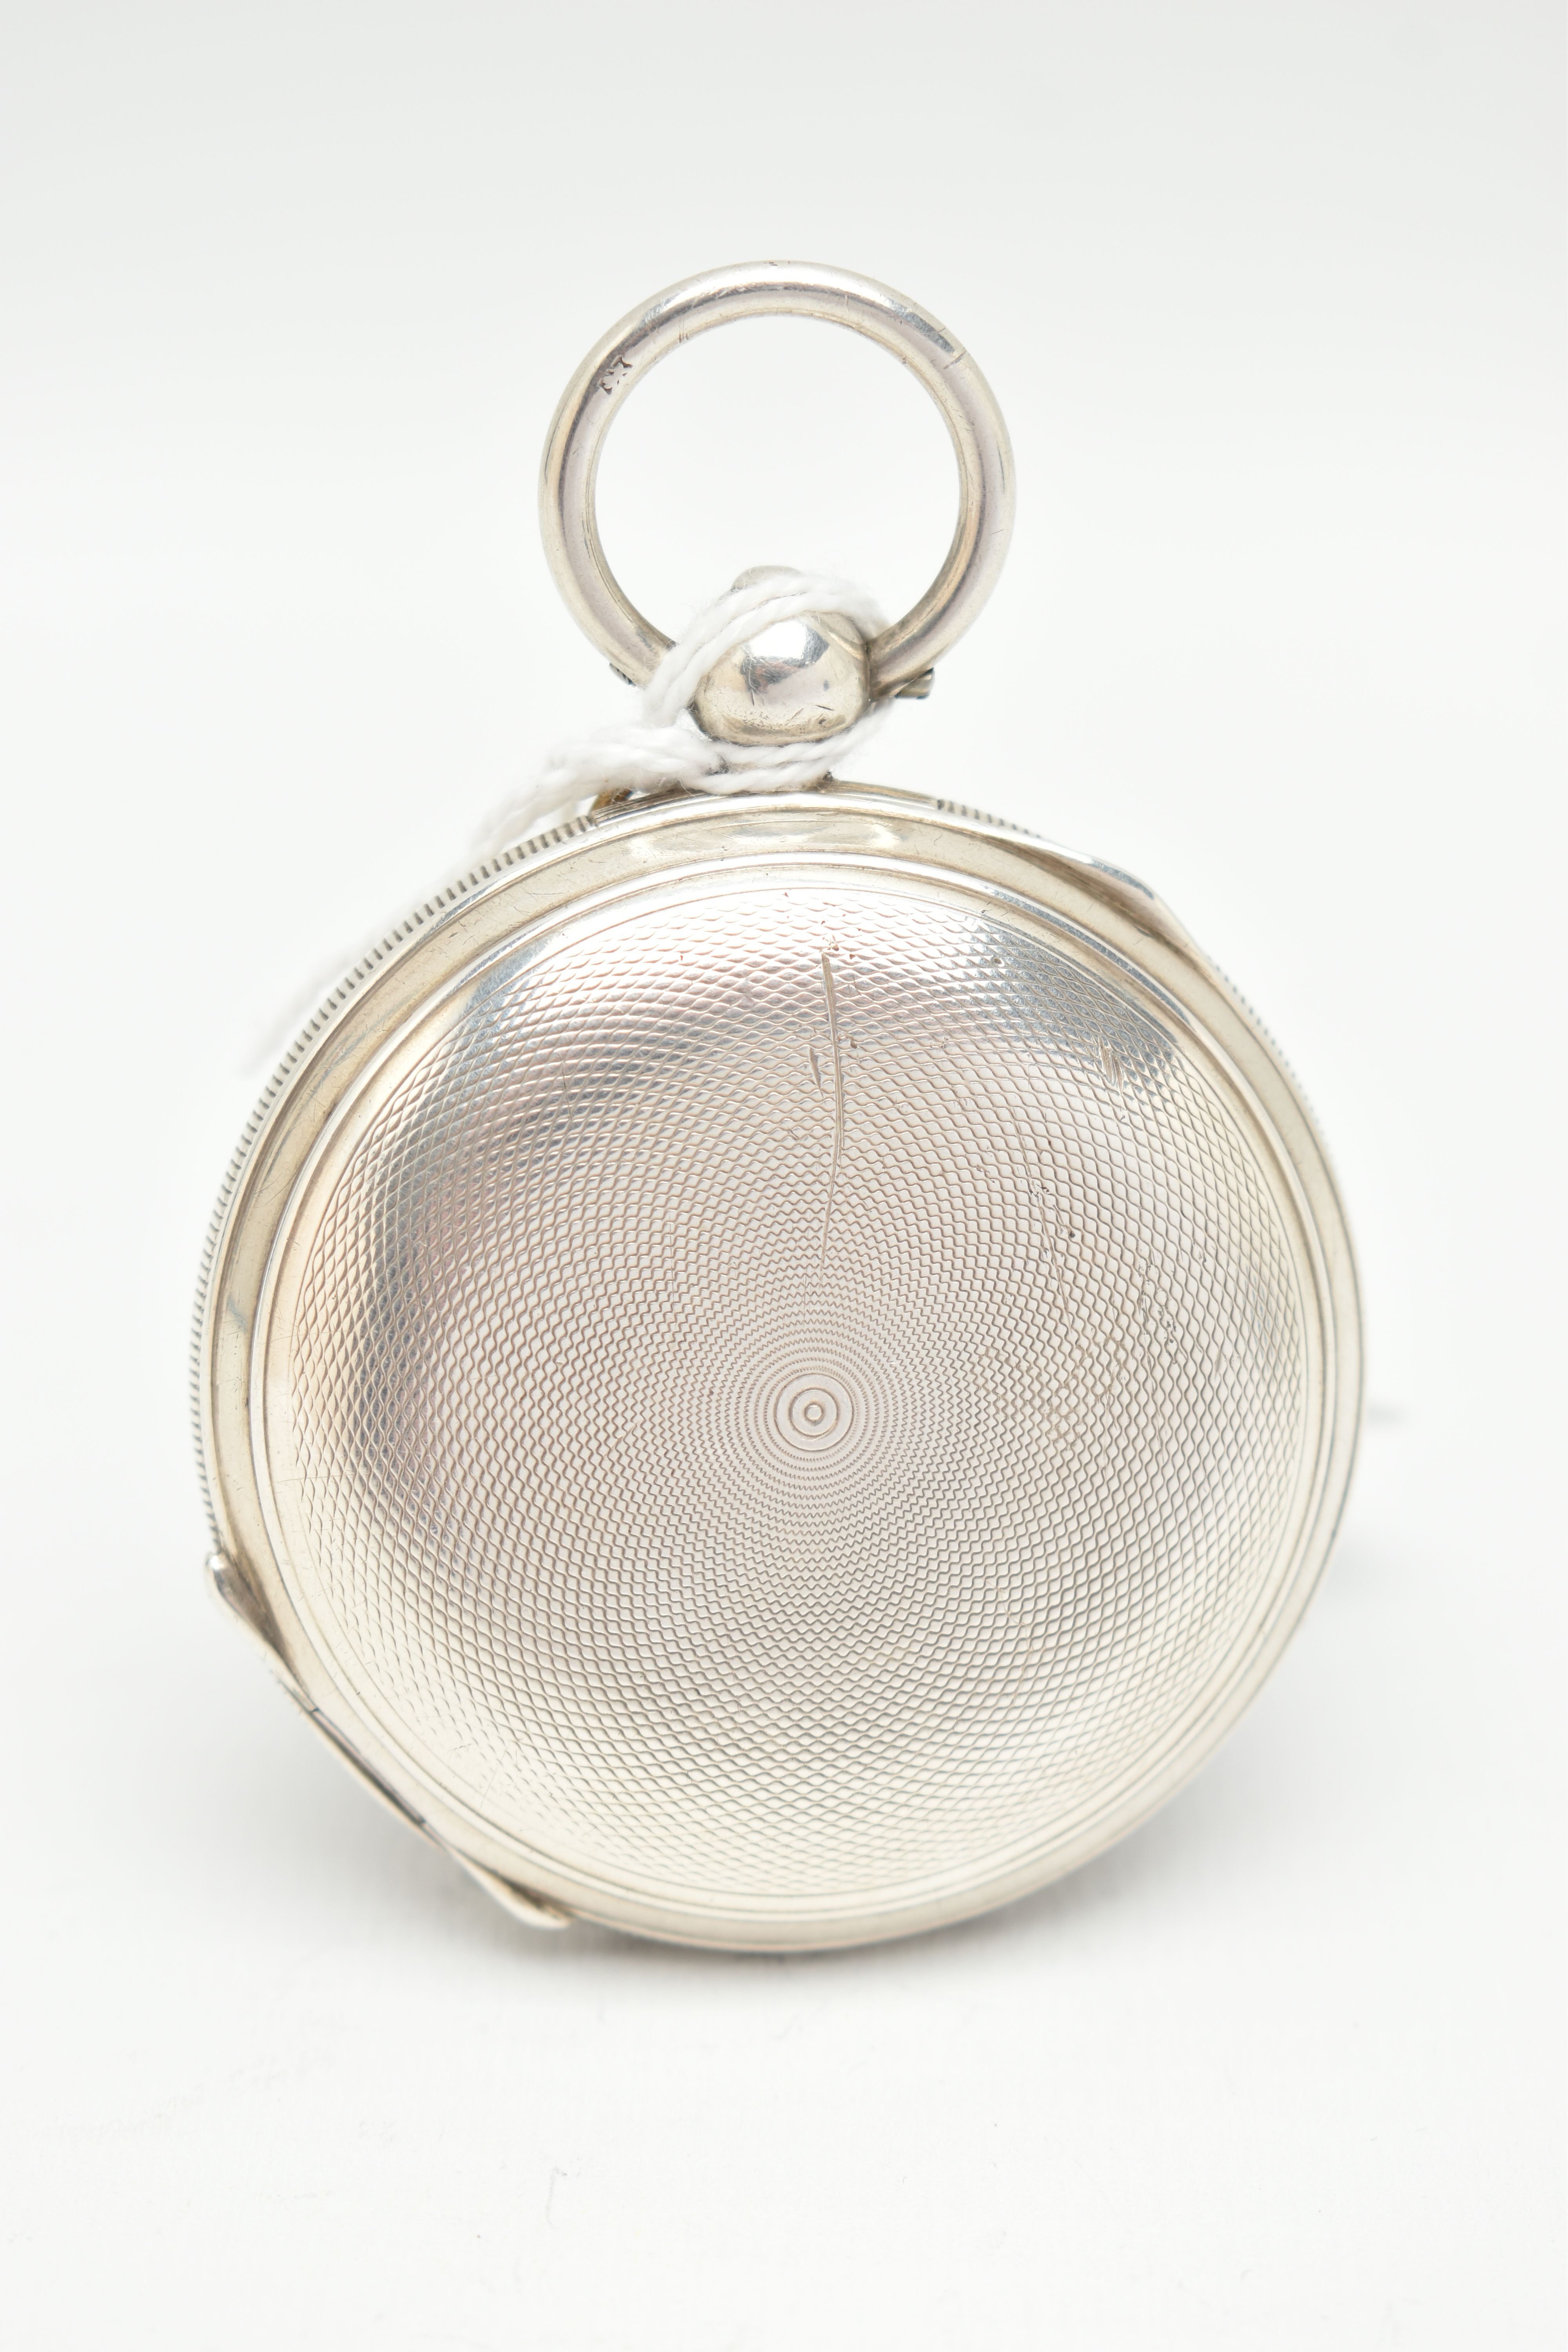 AN EDWARDIAN SILVER FULL HUNTER POCKET WATCH, key wound movement, Roman numerals, second - Image 3 of 6